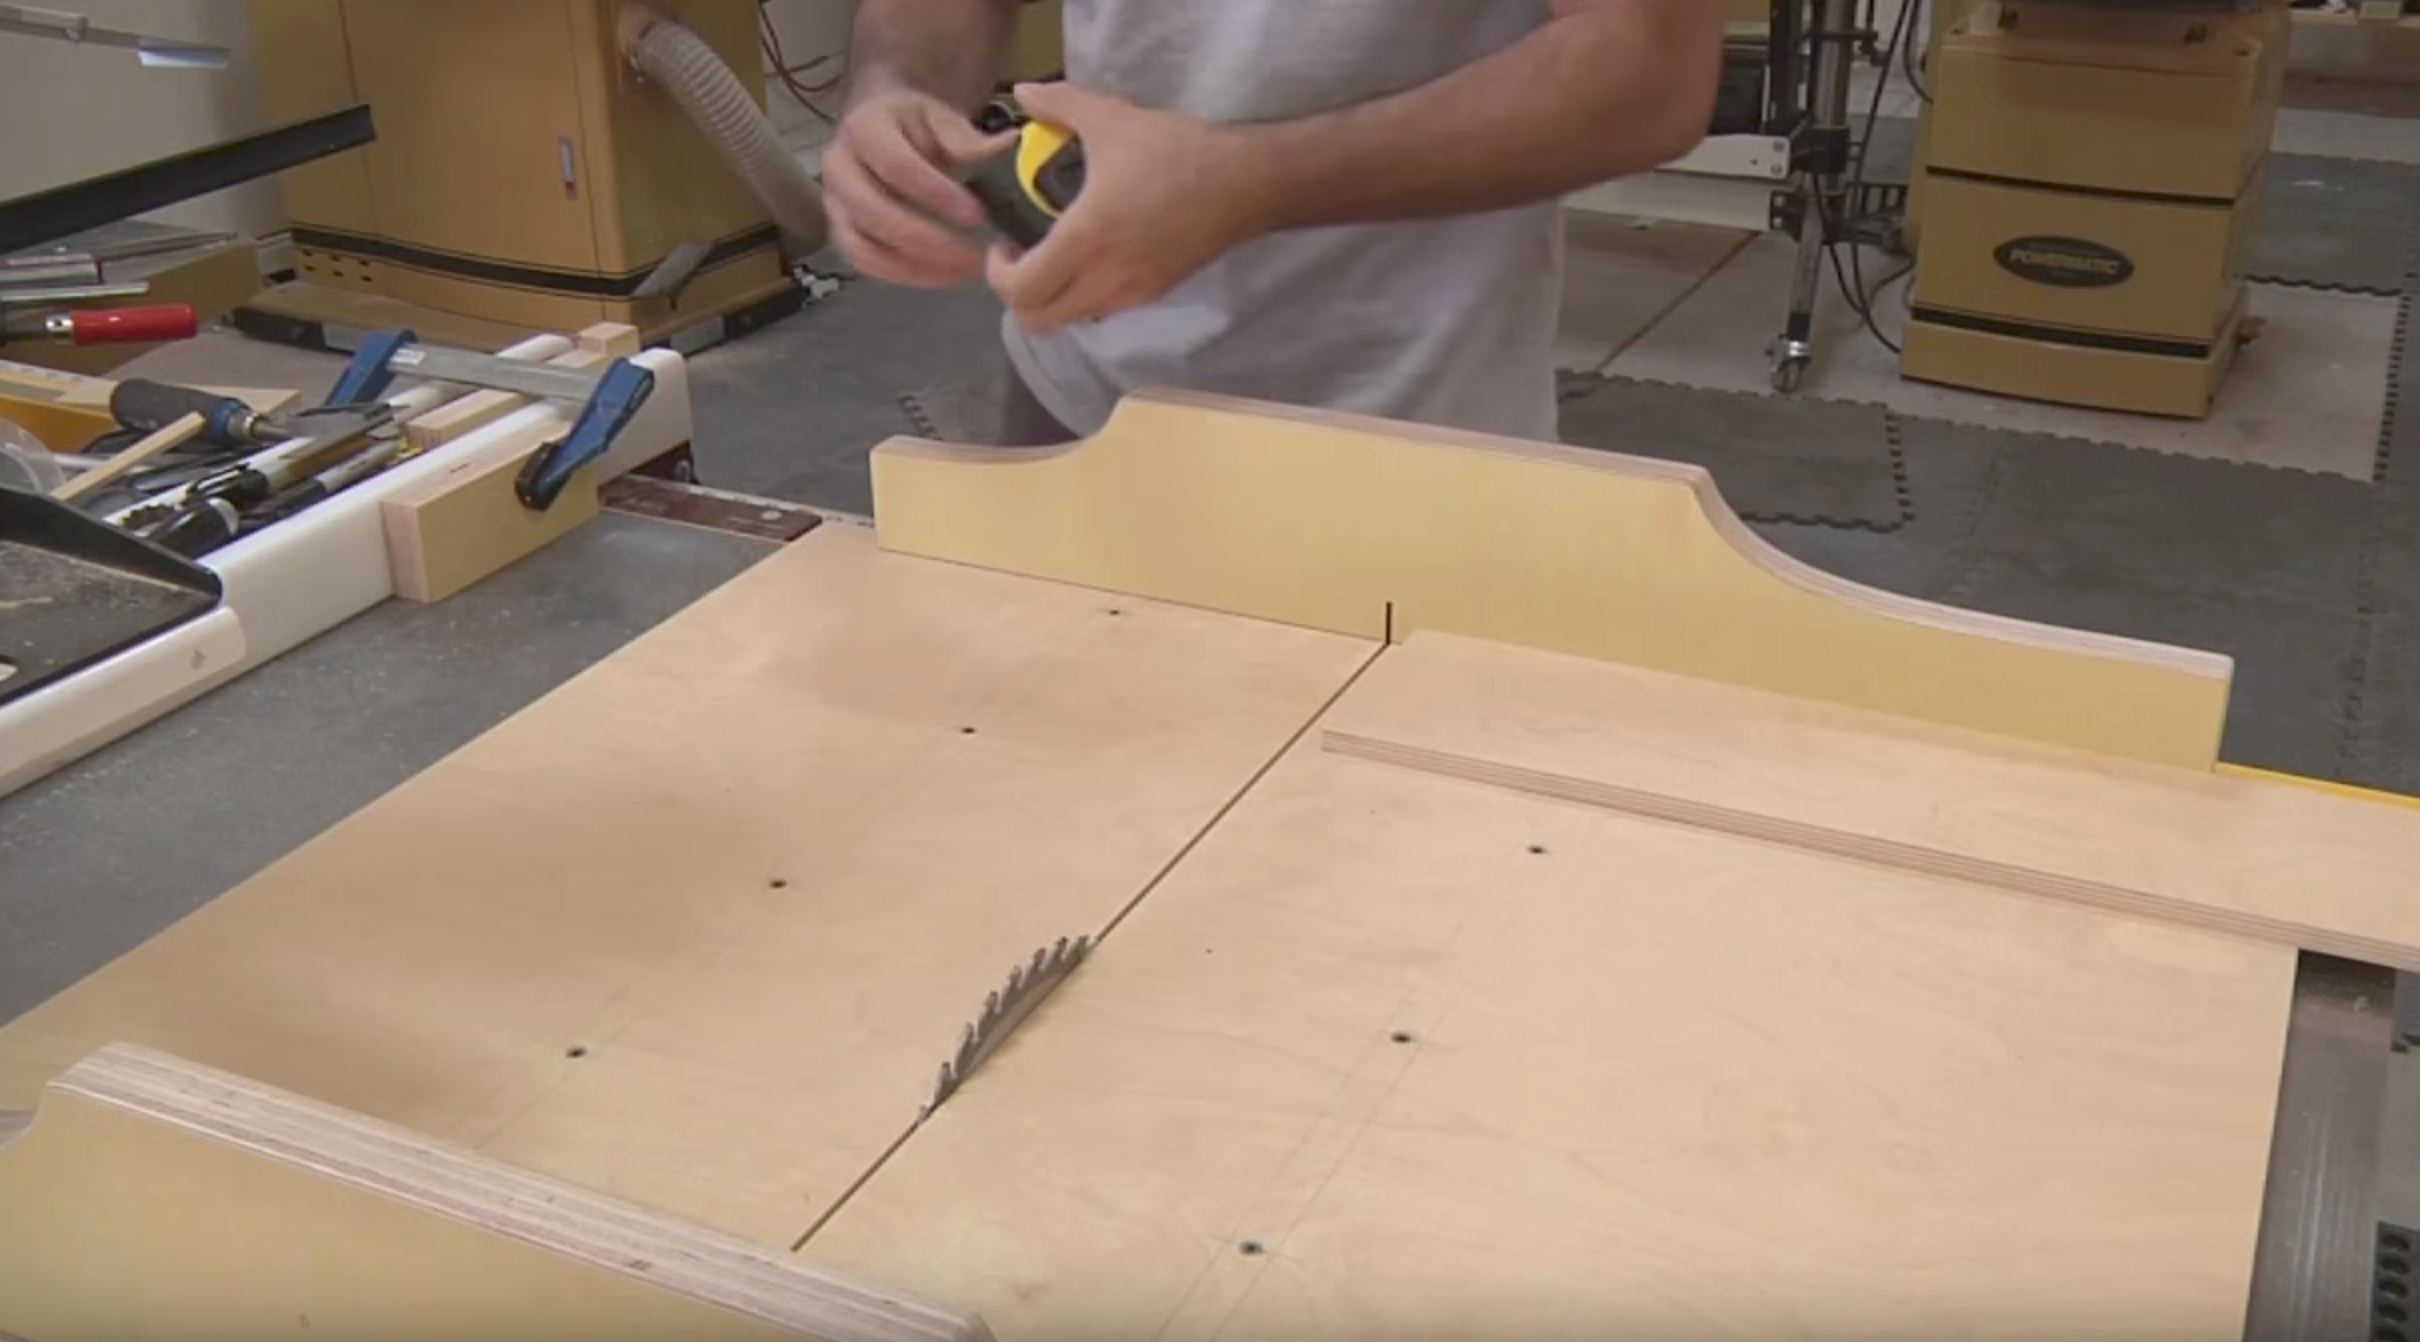 Quick Zero-clearance Table Saw Mod - Woodworking, Blog, Videos, Plans